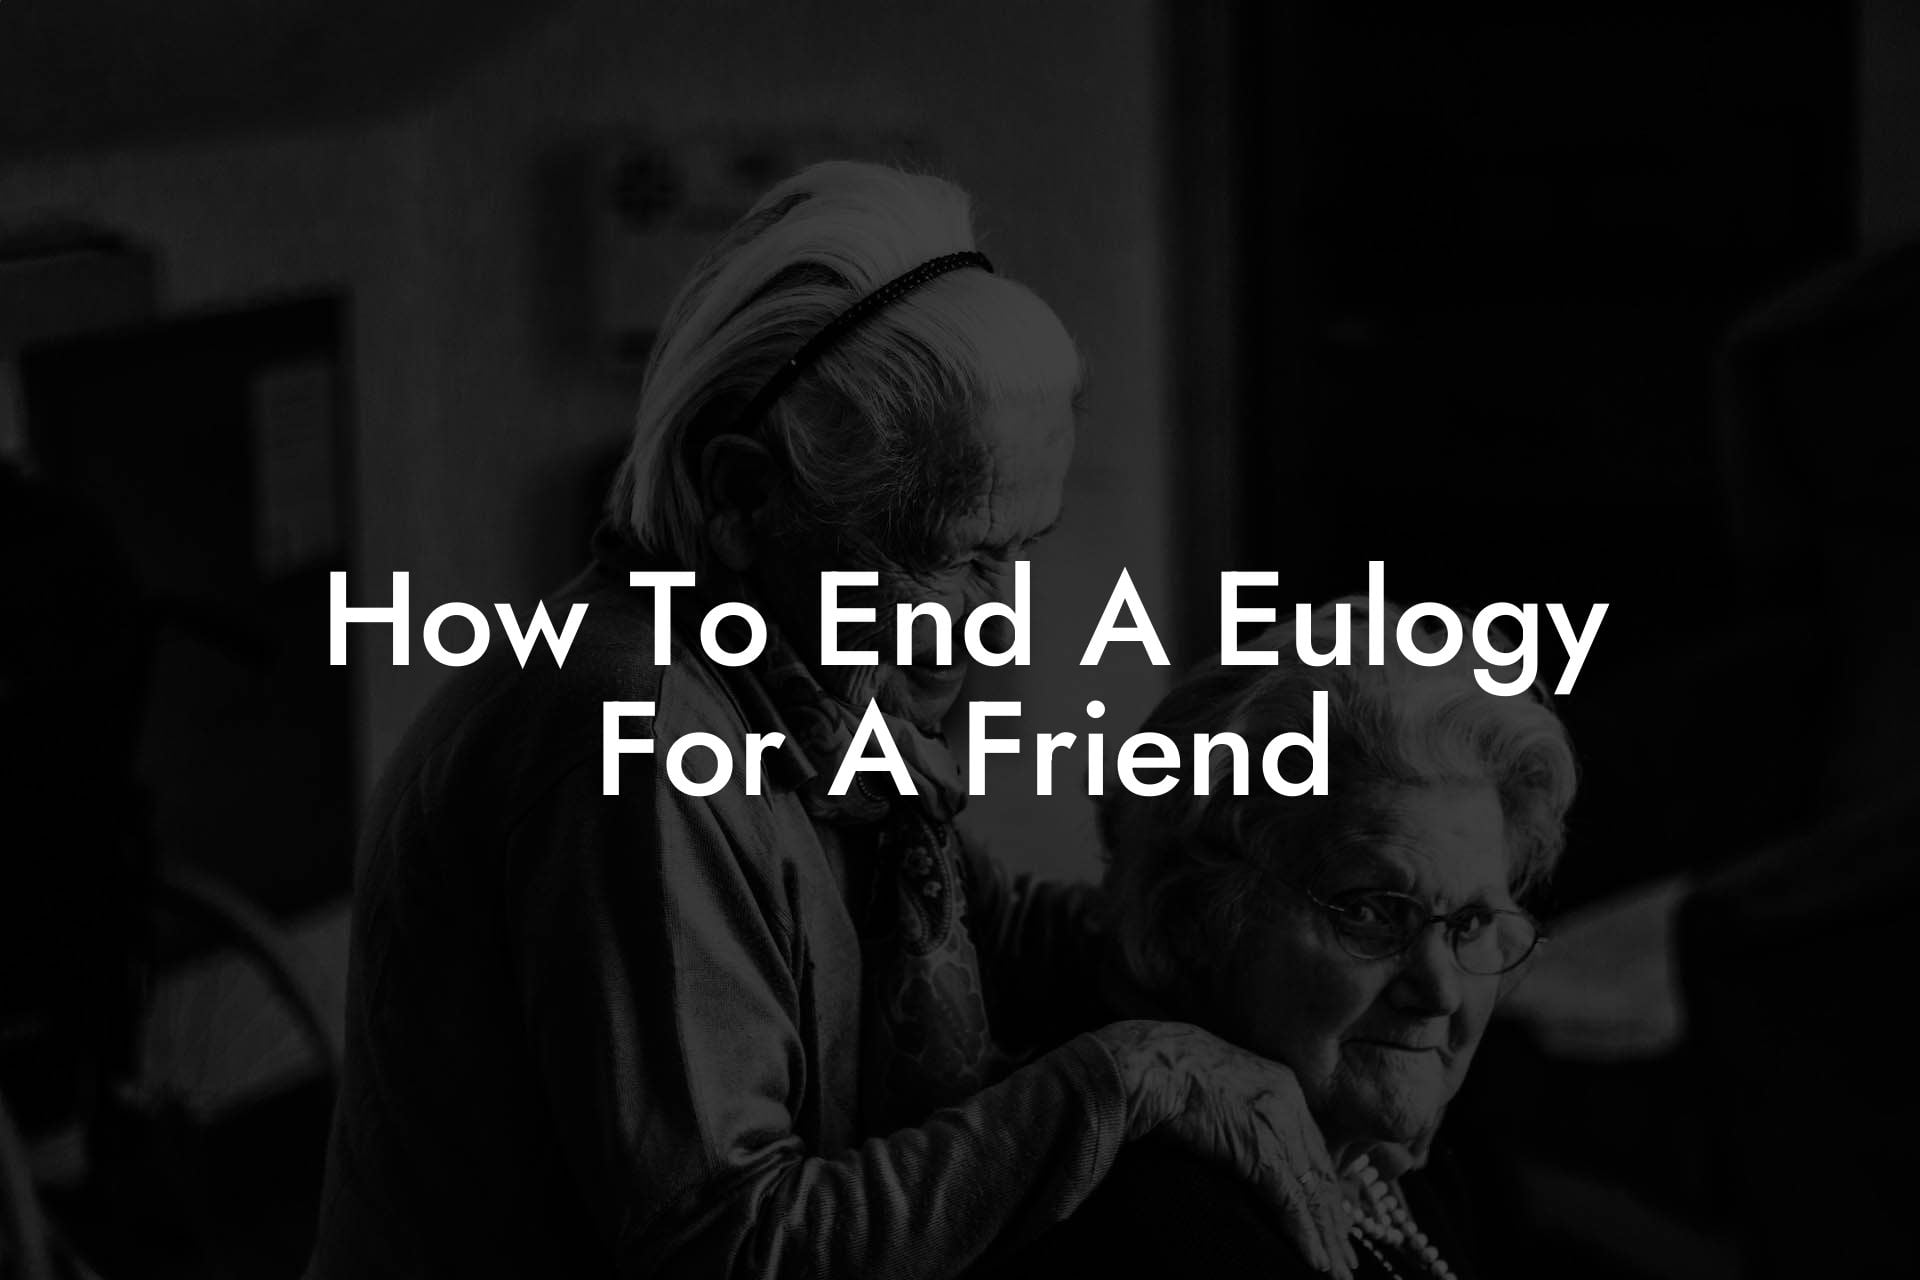 How To End A Eulogy For A Friend